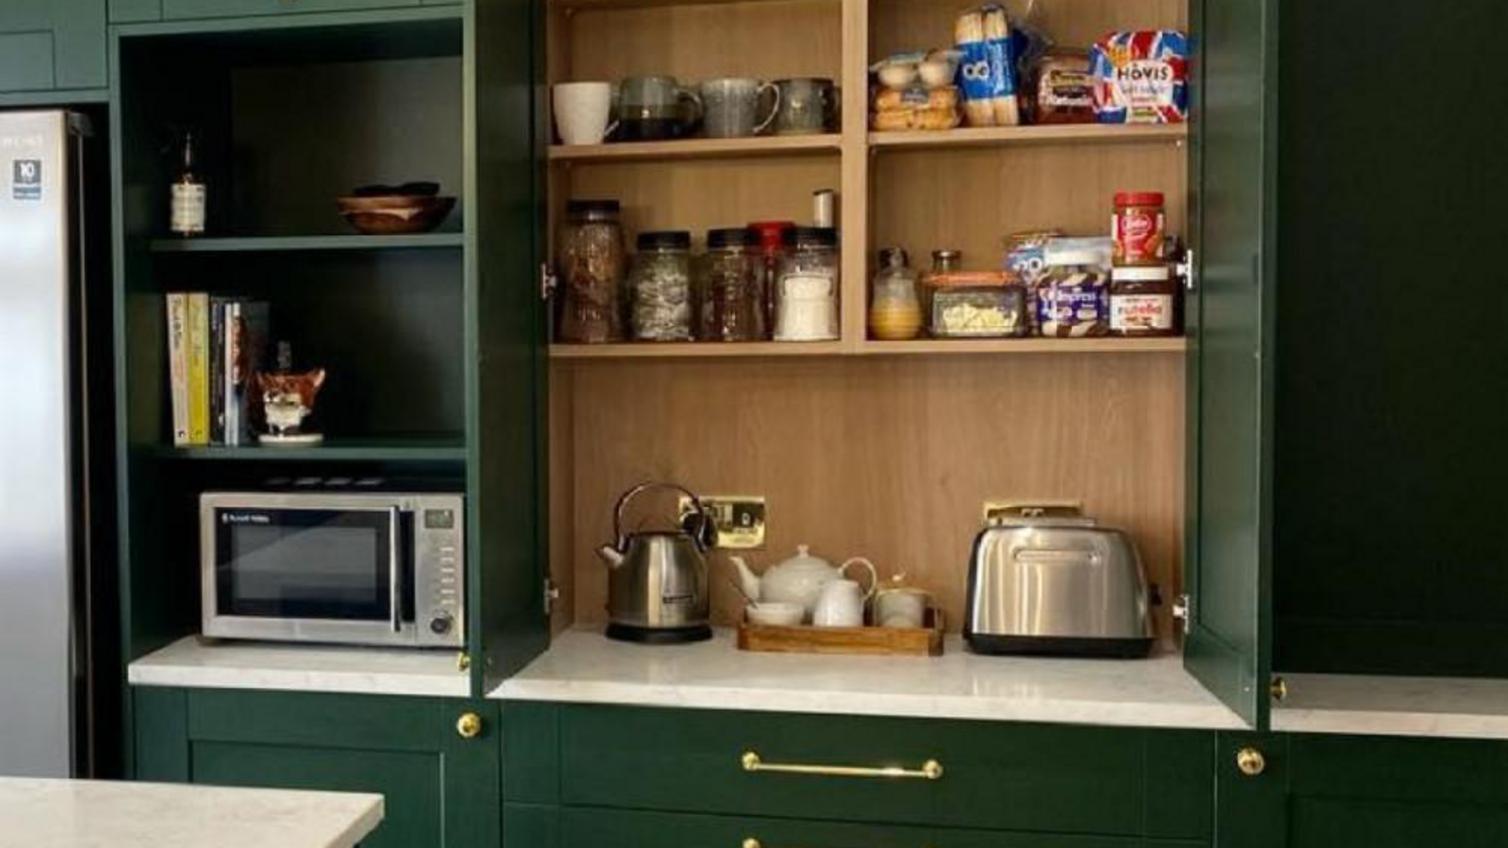 Kitchen storage idea using integrated shelves and matching doors for a hidden breakfast area.